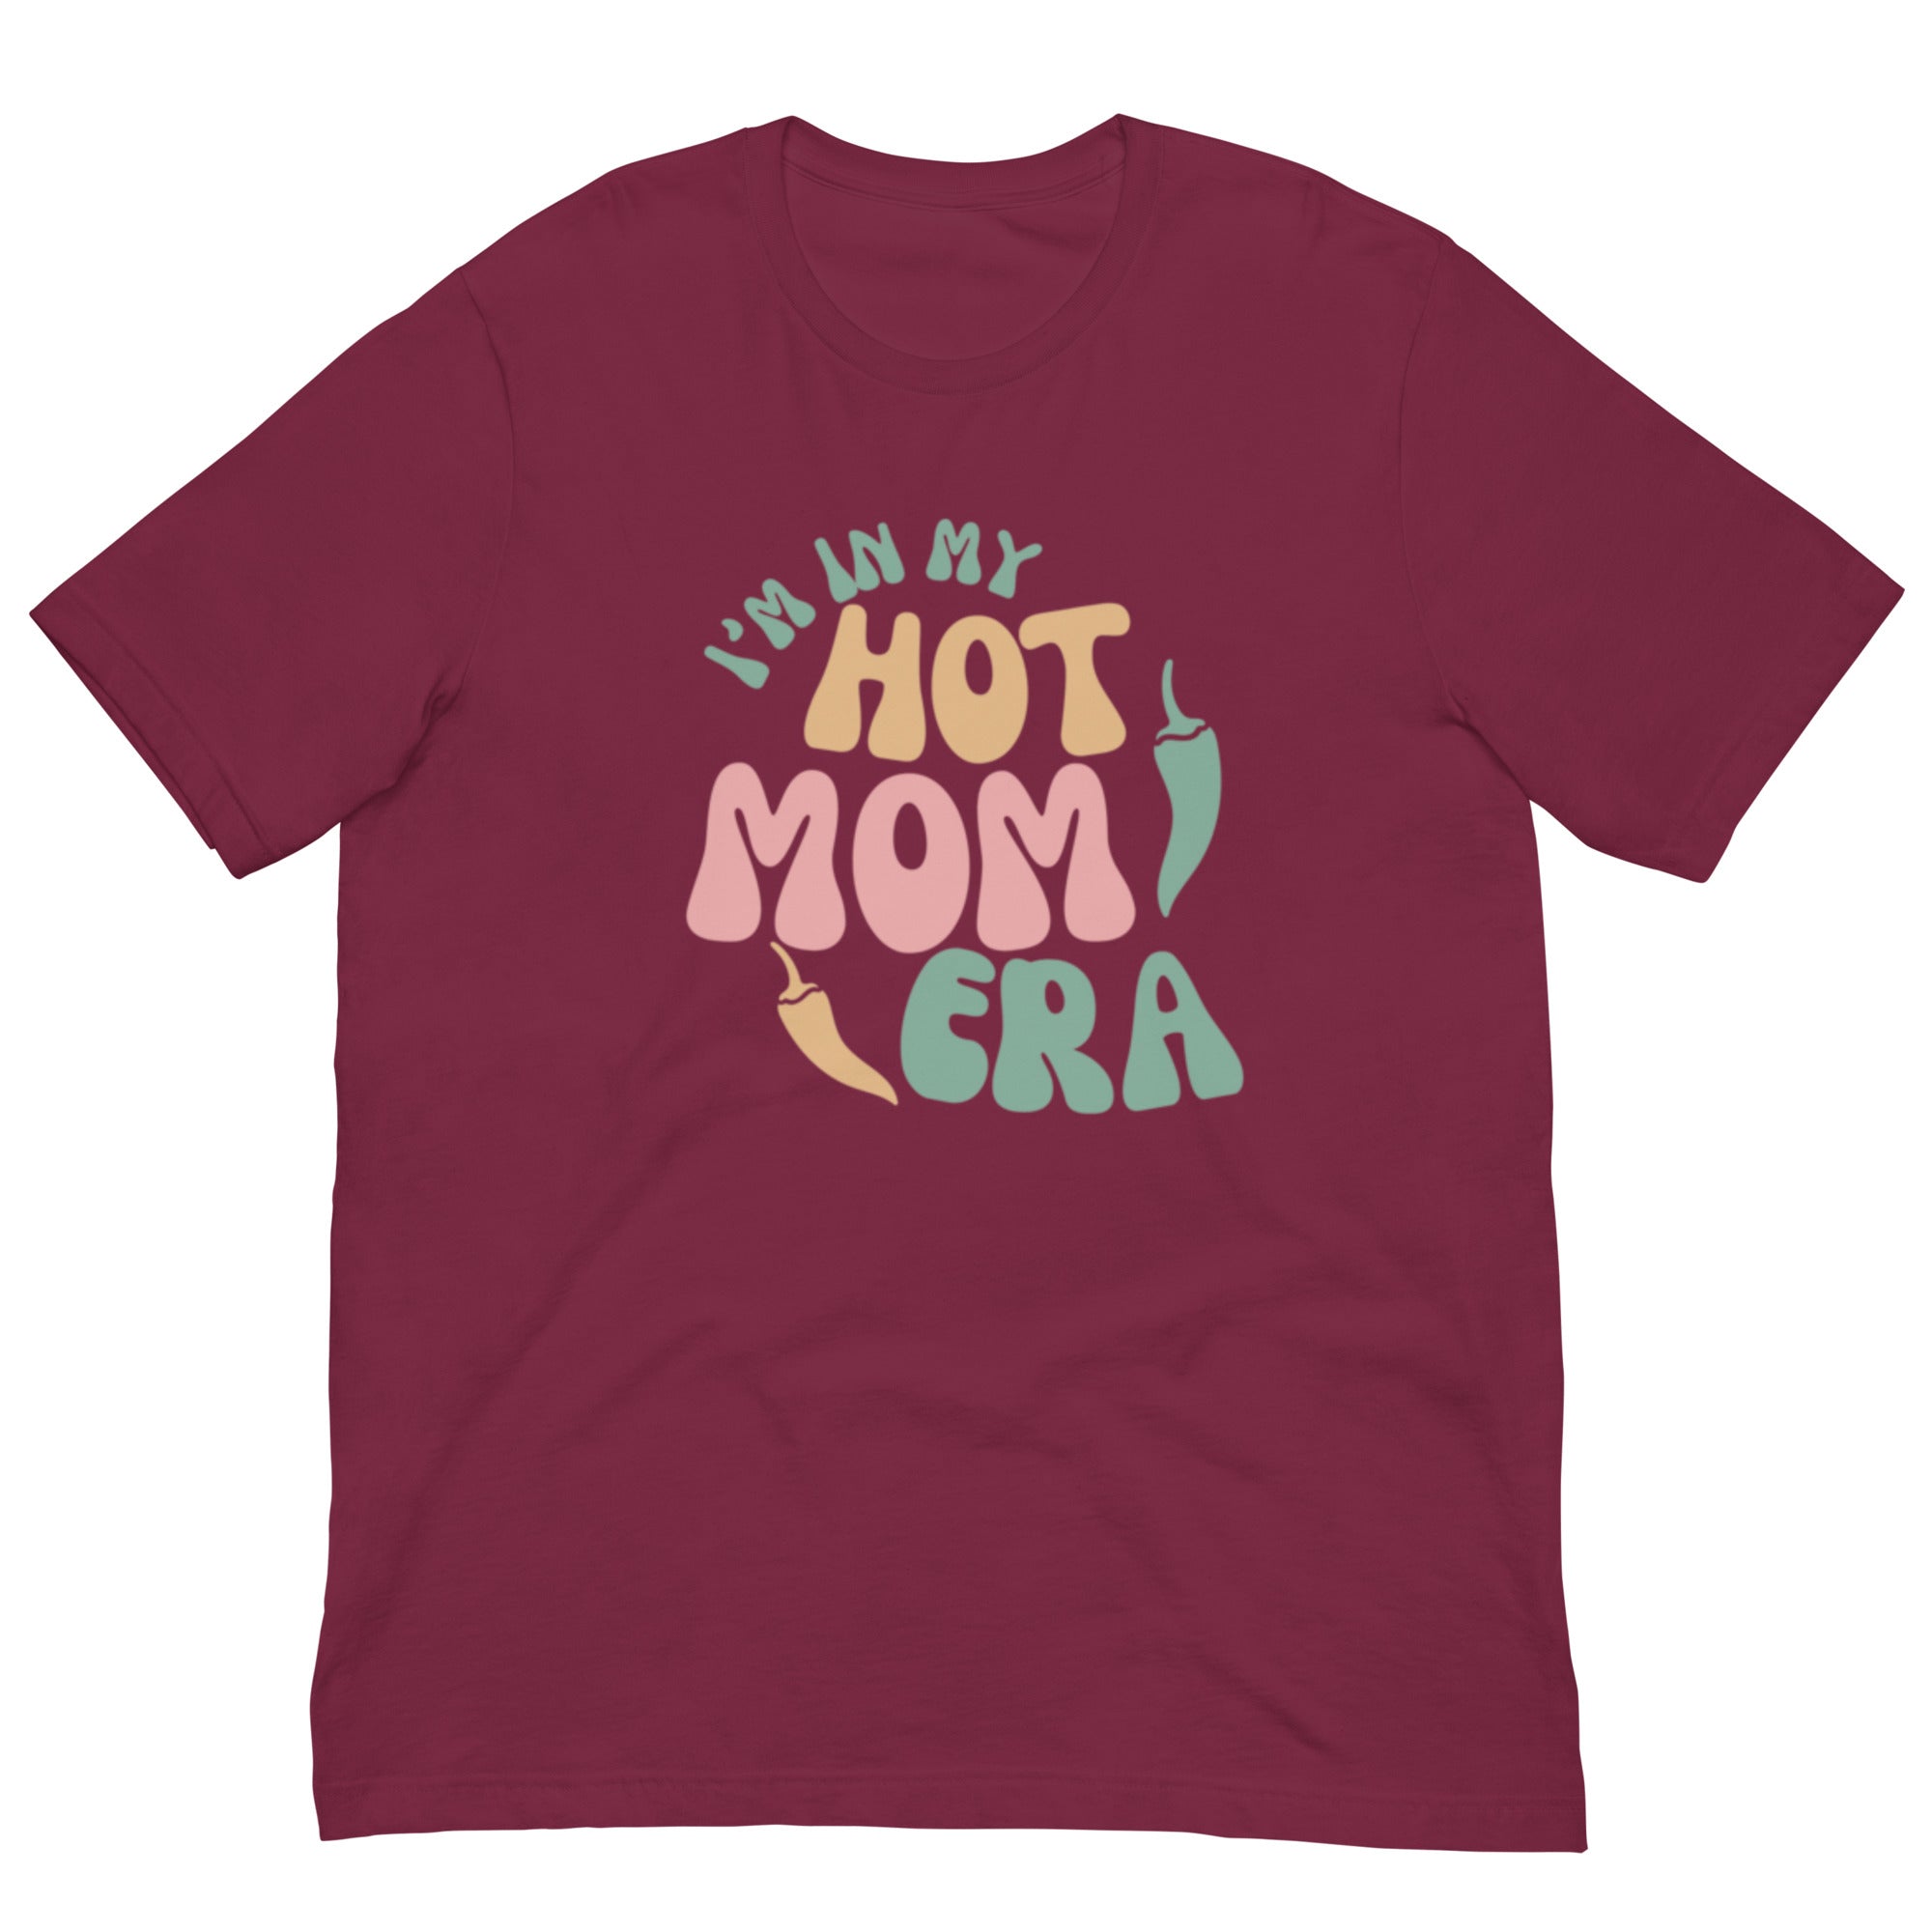 A maroon breathable Era Shirt with the phrase "in my hot mom era" printed in colorful, stylized letters on the front.